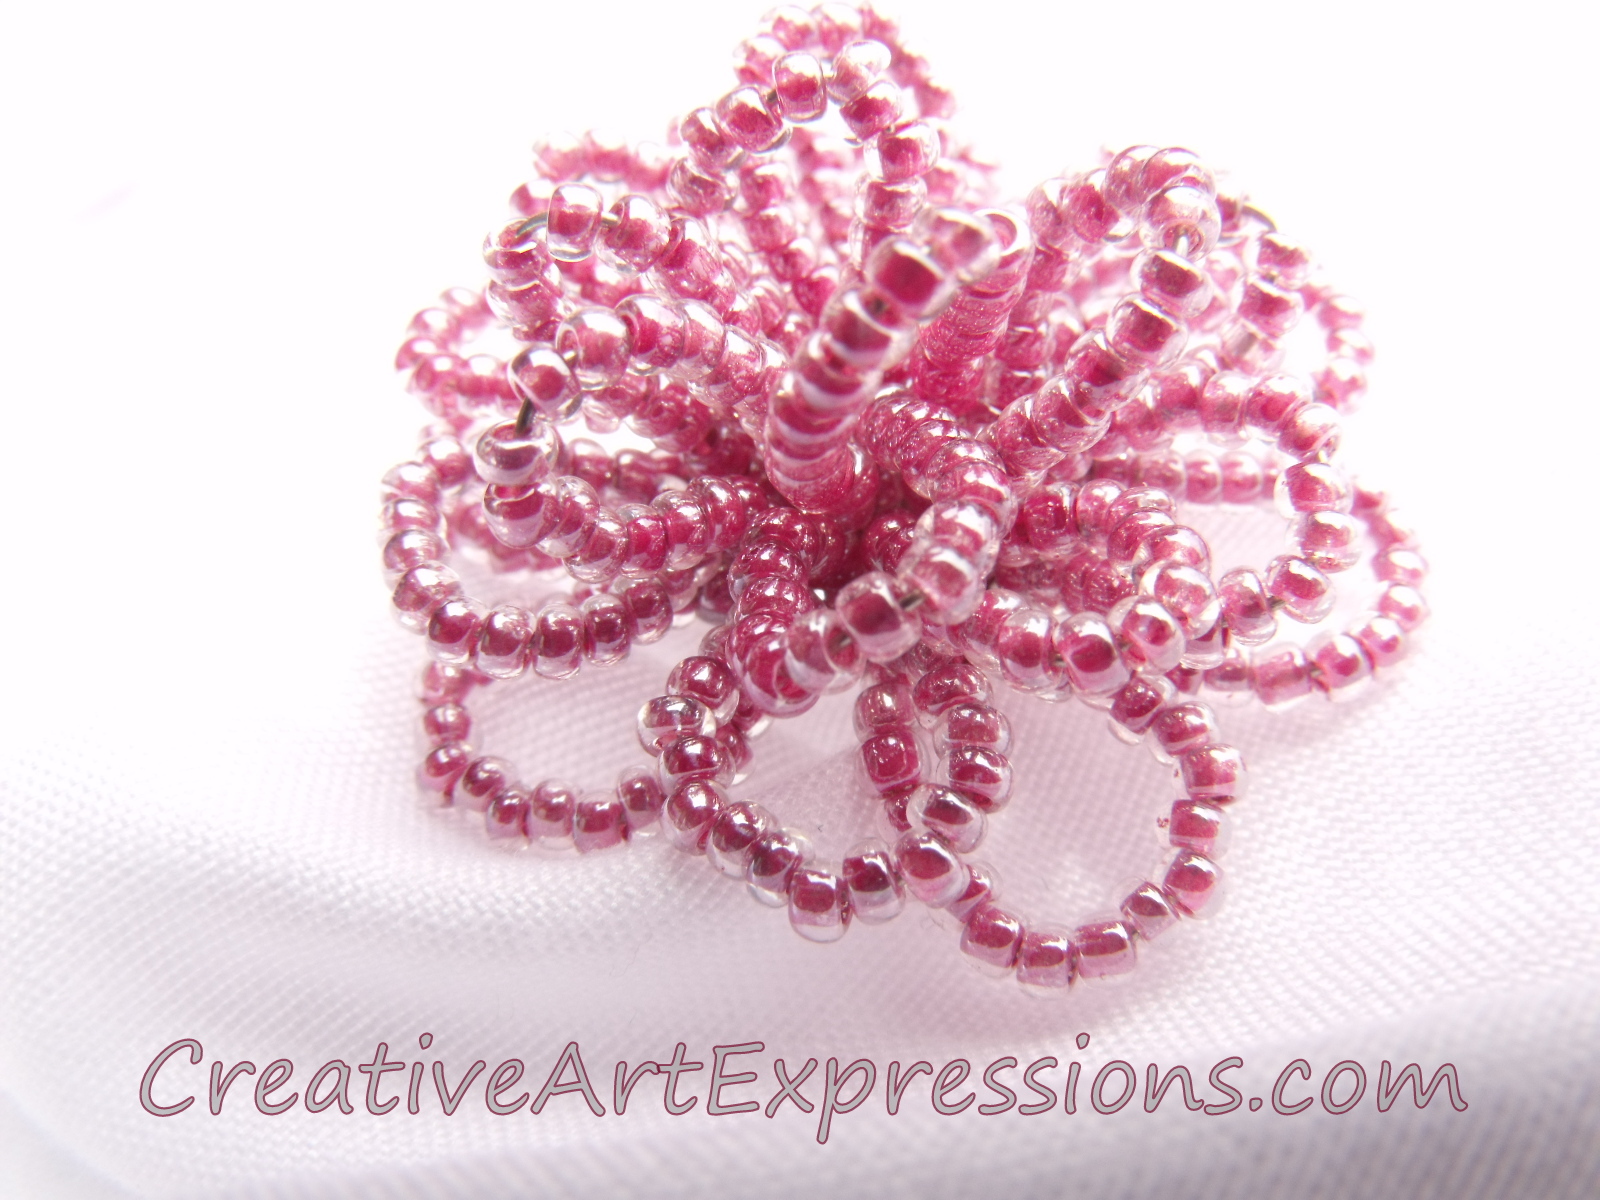 Creative Art Expressions Handmade Pink Seed Bead Flower Ring Jewelry Design